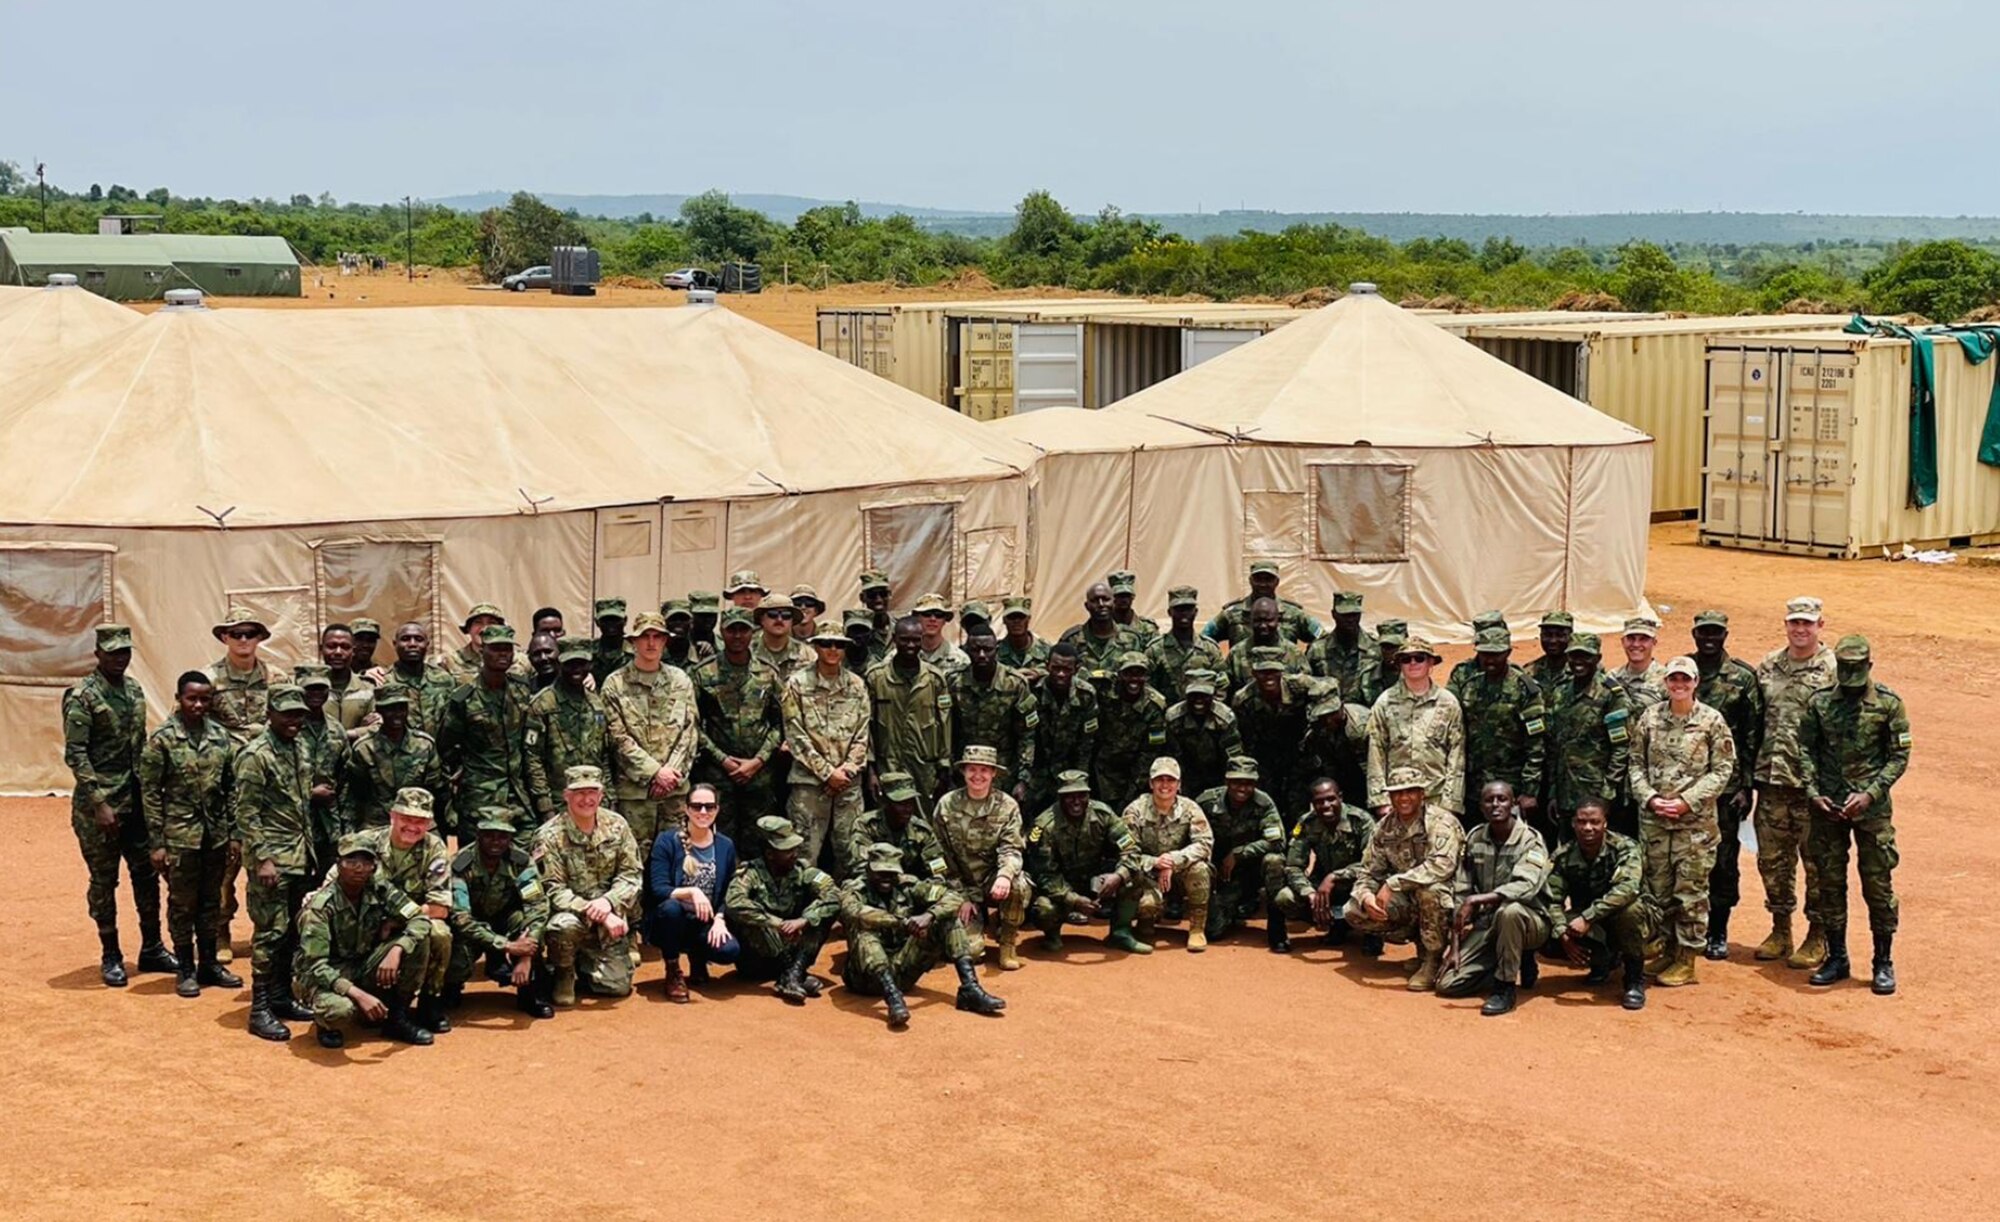 Members of the Nebraska Air National Guard and Rwanda Defence Force pose for a group picture March 20, 2022, during the Justified Accord exercise at Gako Military Academy, Rwanda. The Nebraska Guard and Rwanda are partners under the Department of Defense National Guard Bureau State Partnership Program.